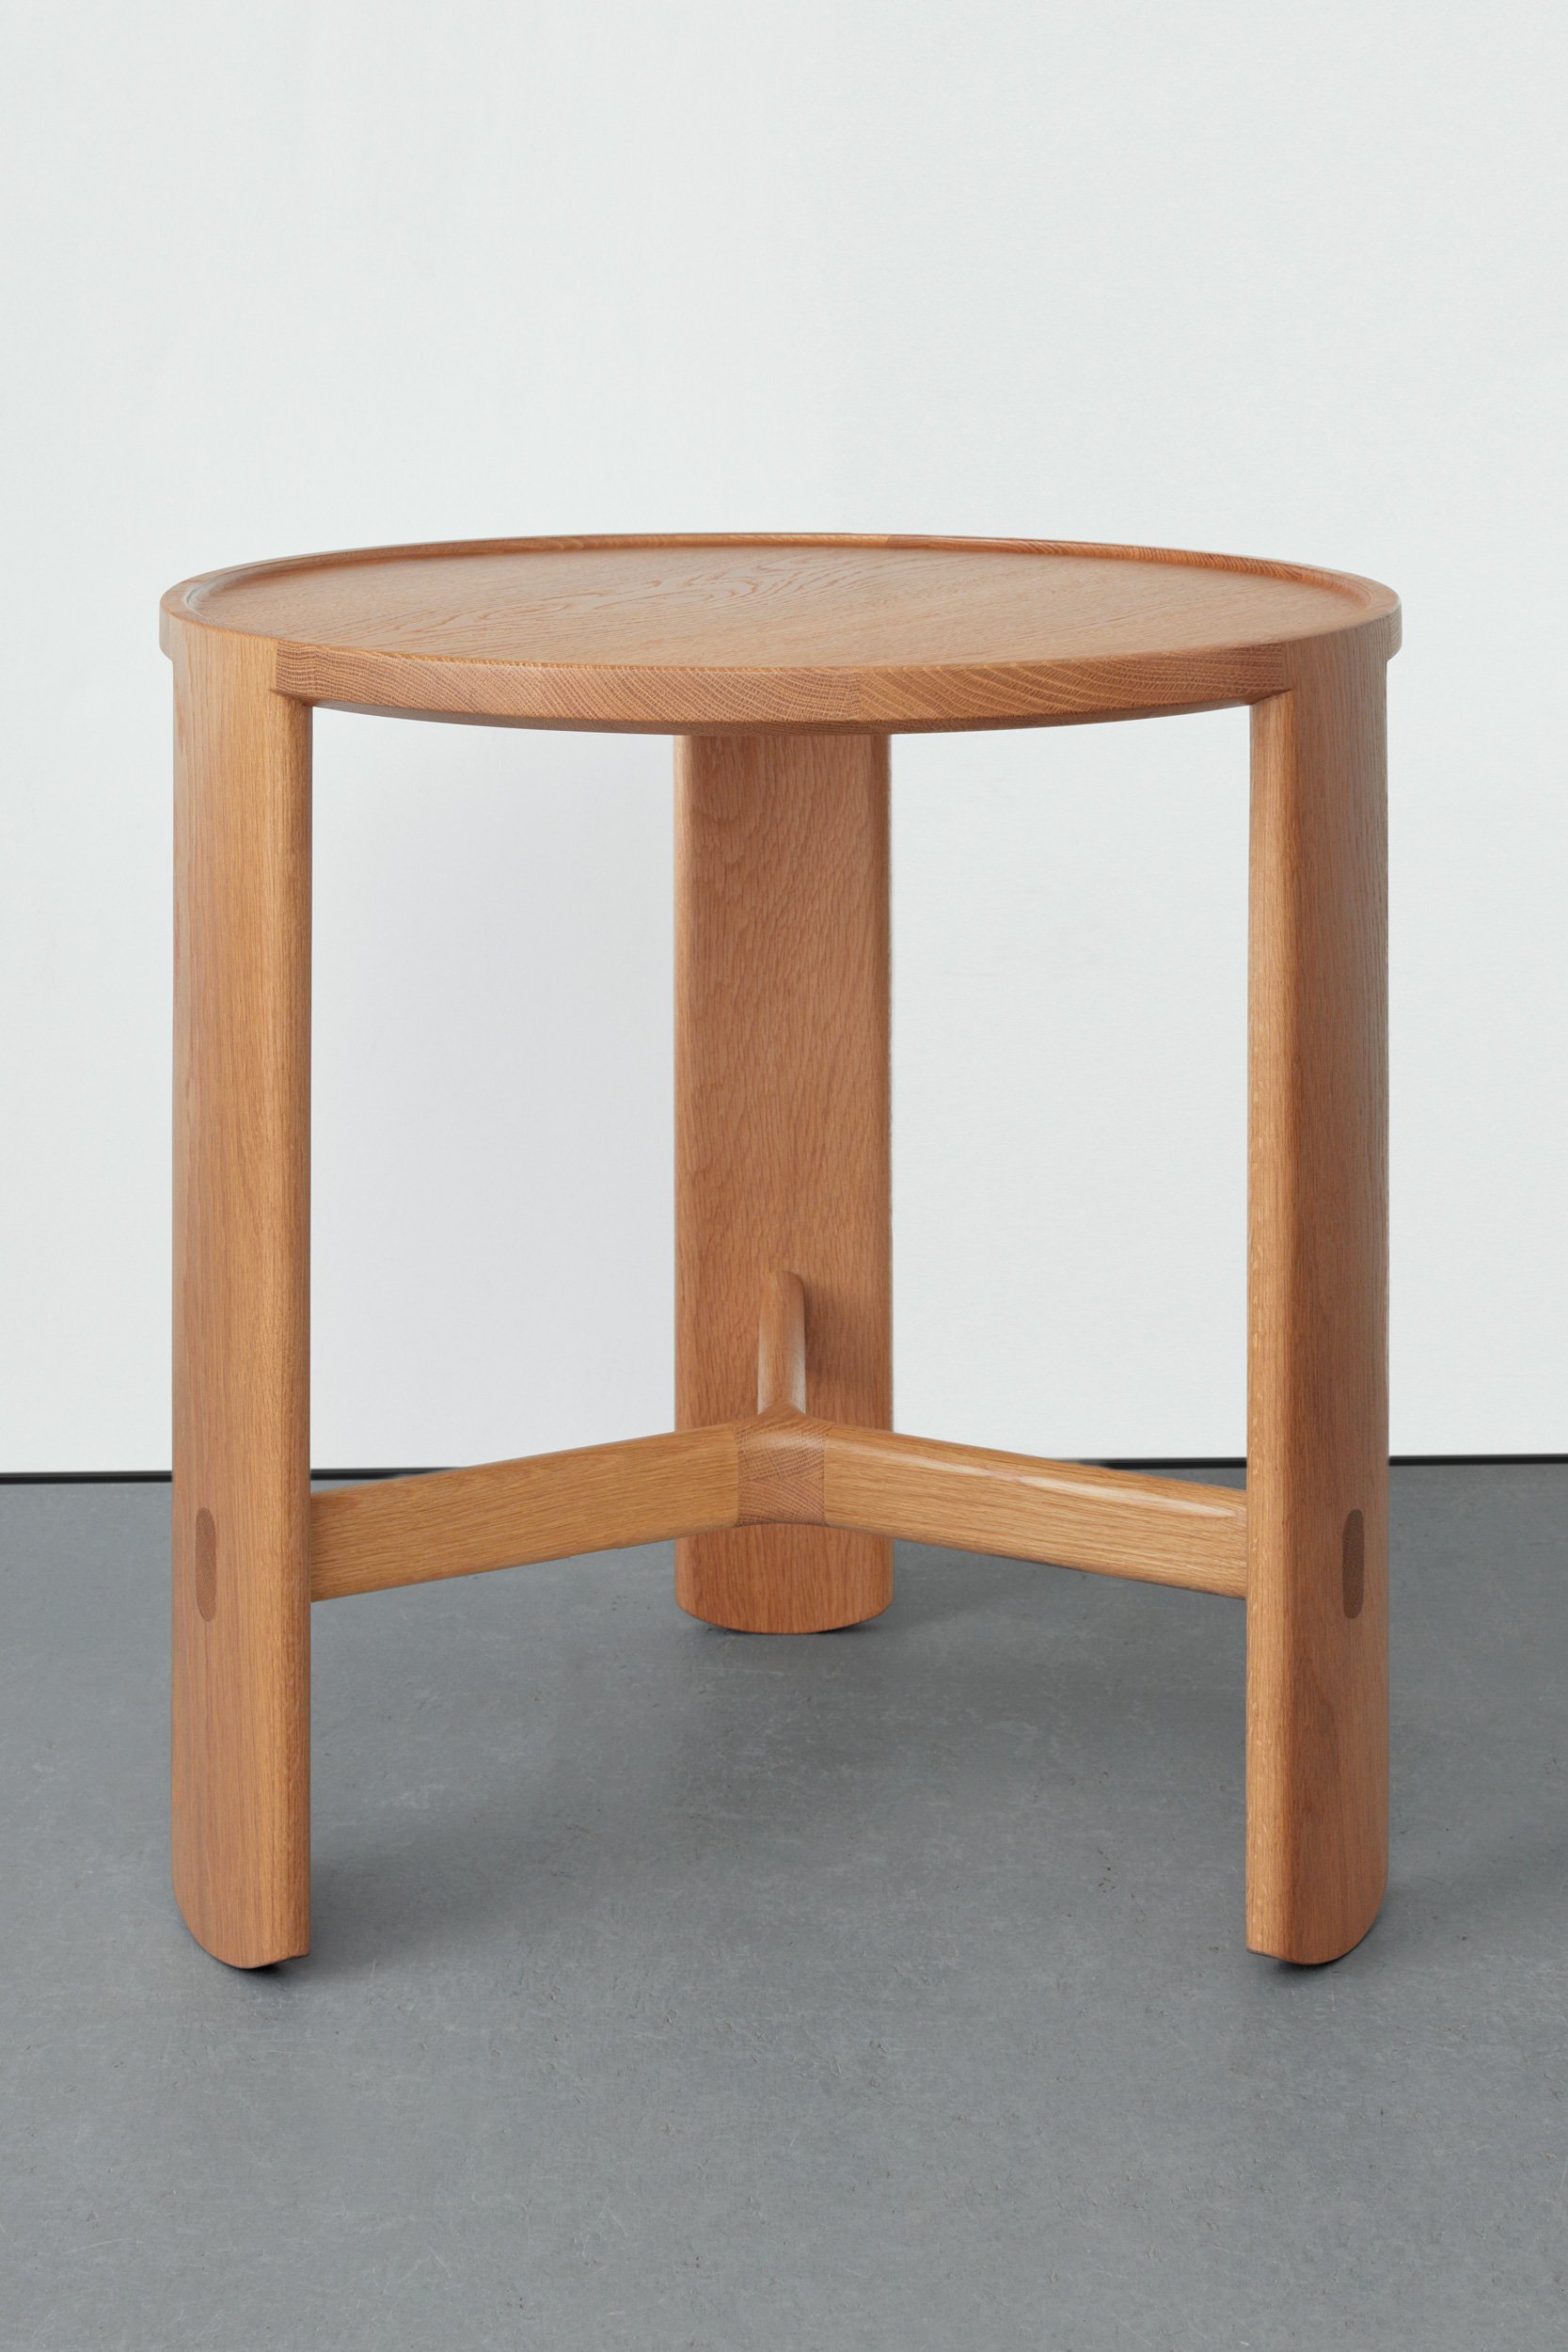 ghent table front view.jpg